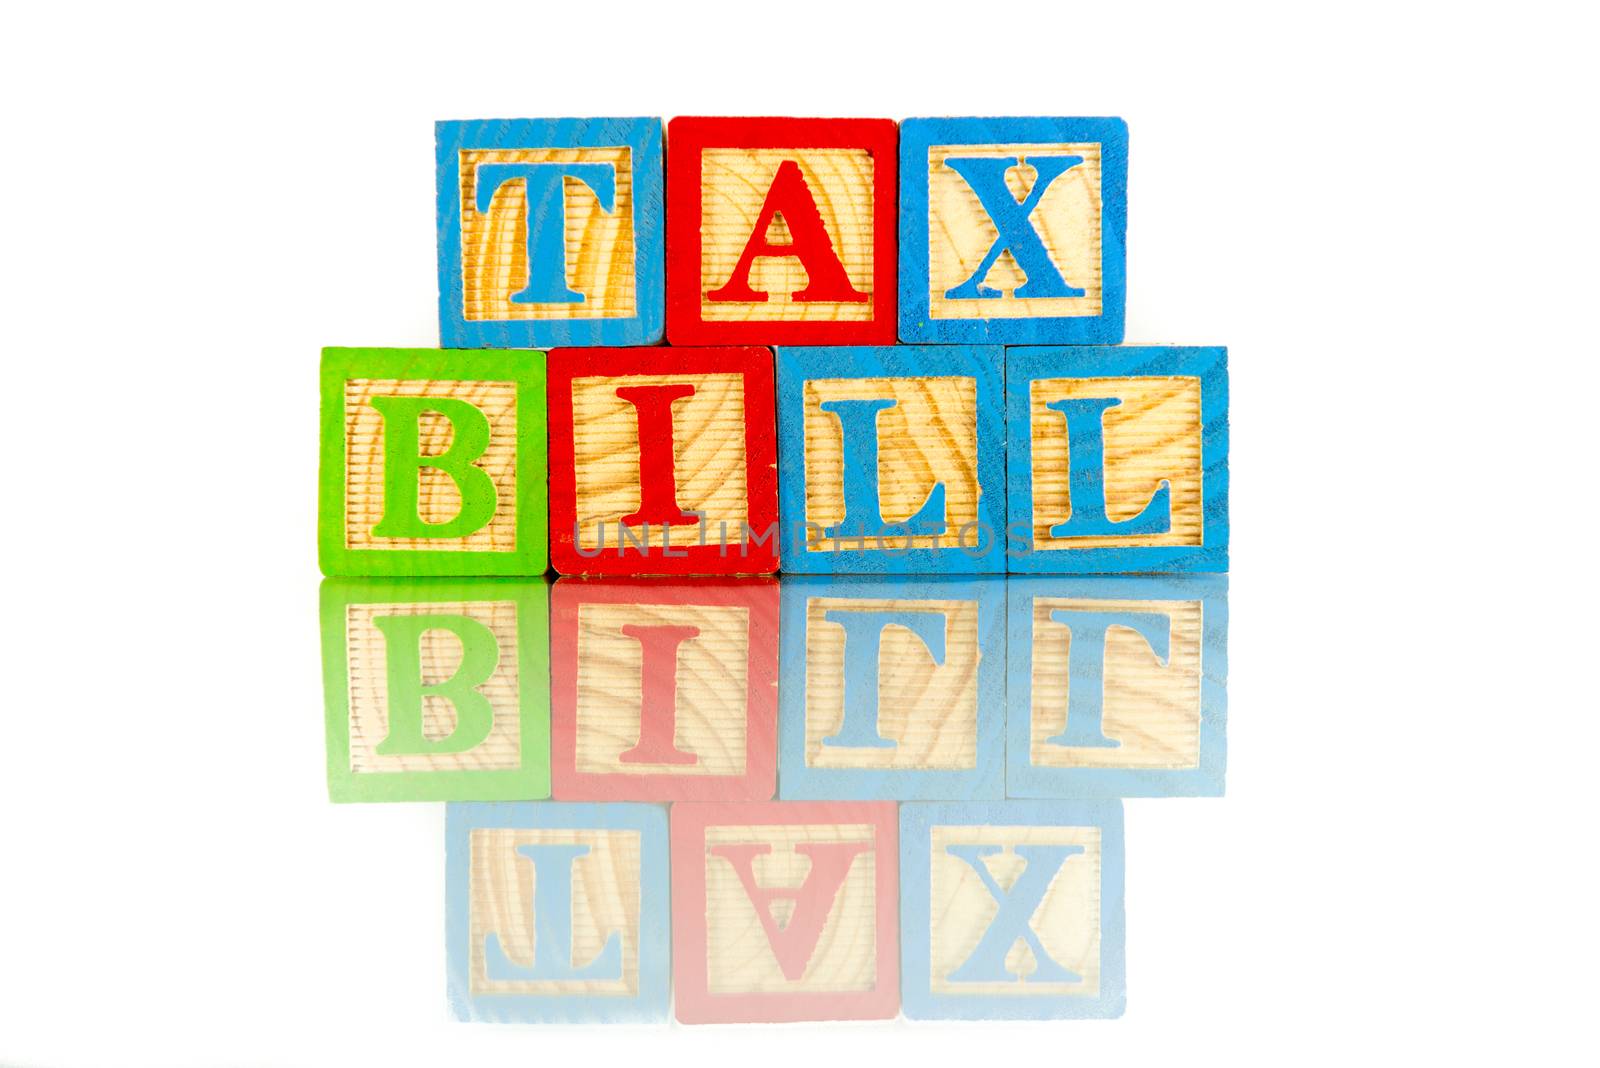 tax bill word reflection on the white background